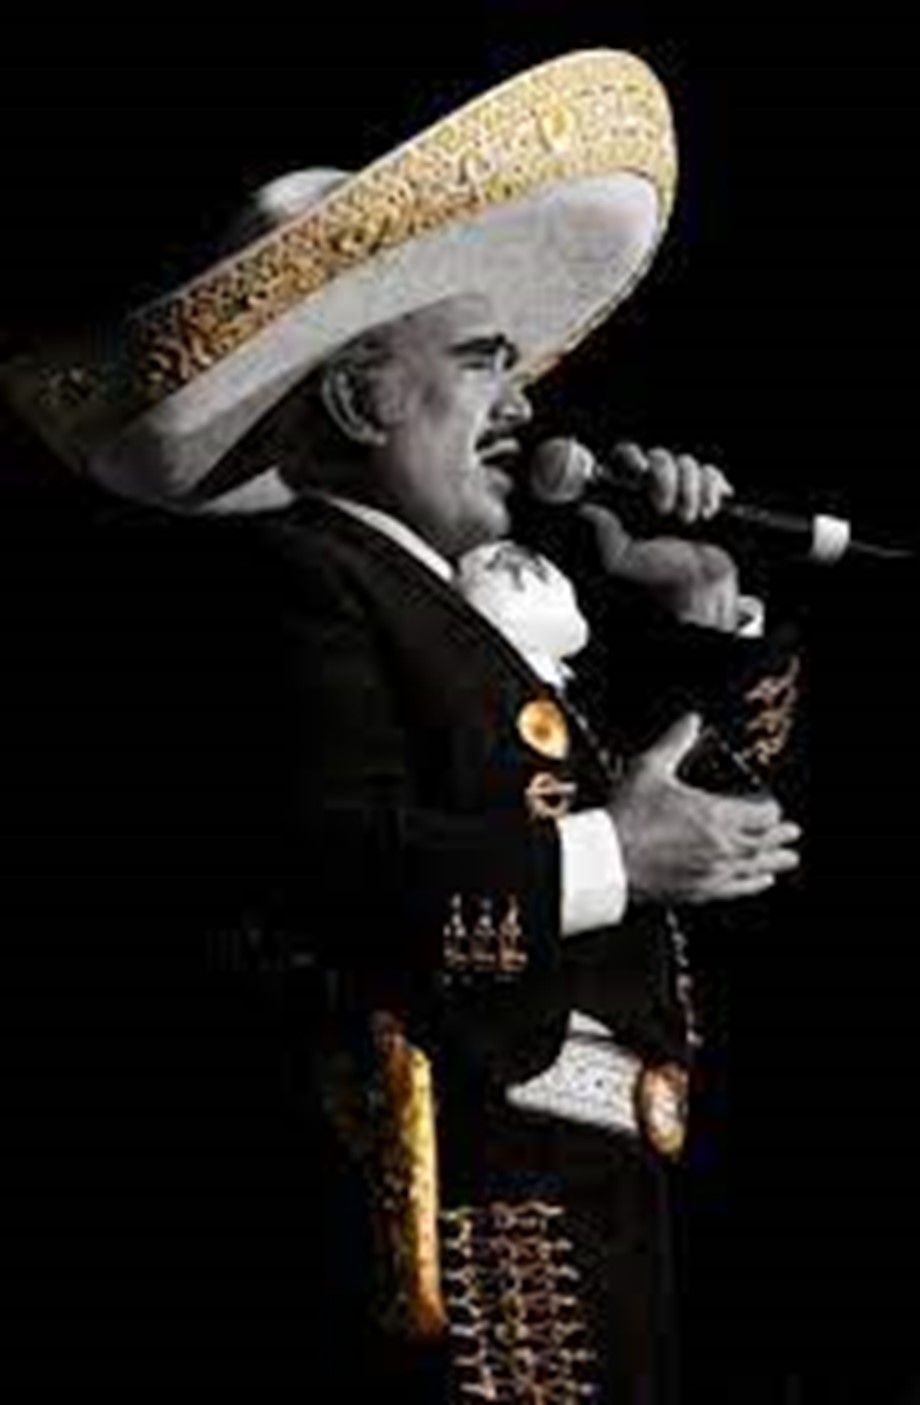 Entertainment News Roundup: Iconic Mexican ranchera singer Vicente Fernandez dies at 81; Willkommen: Oscar-winner Redmayne stars in London revival of ‘Cabaret’ and more